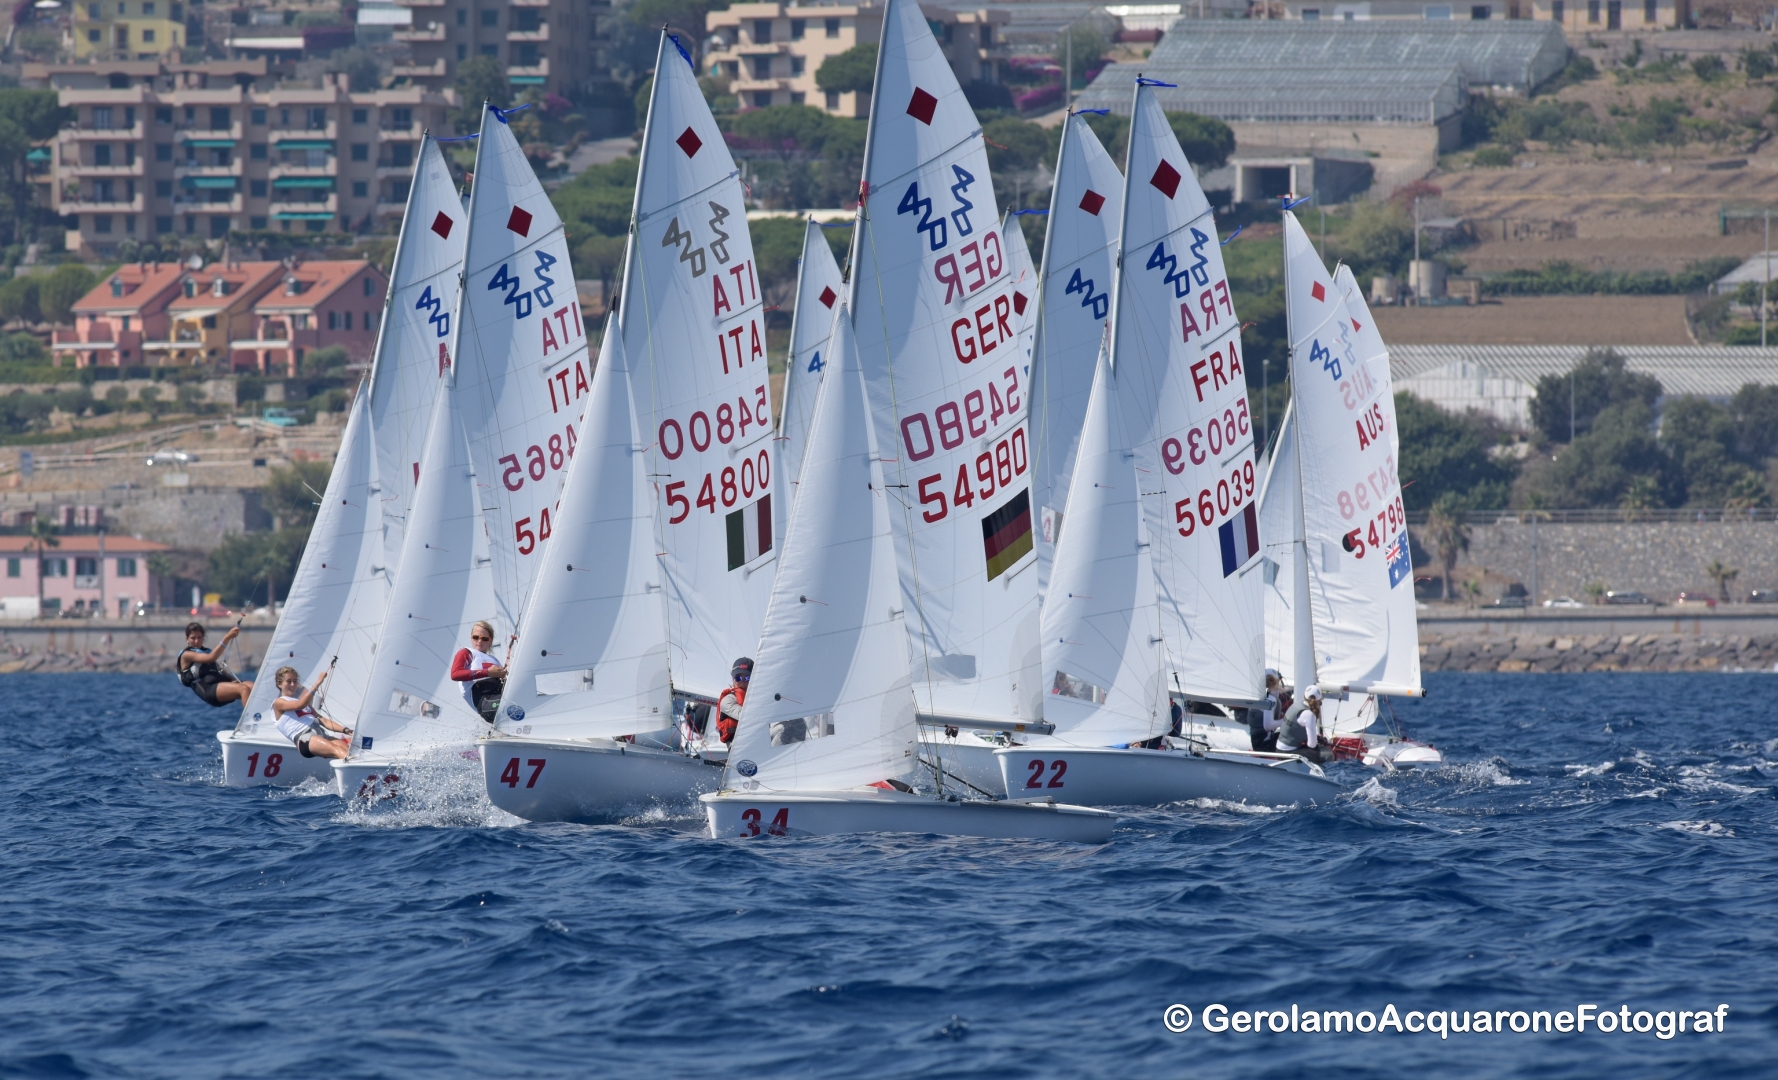 Racing on day 2 at 2016 420 World Championships